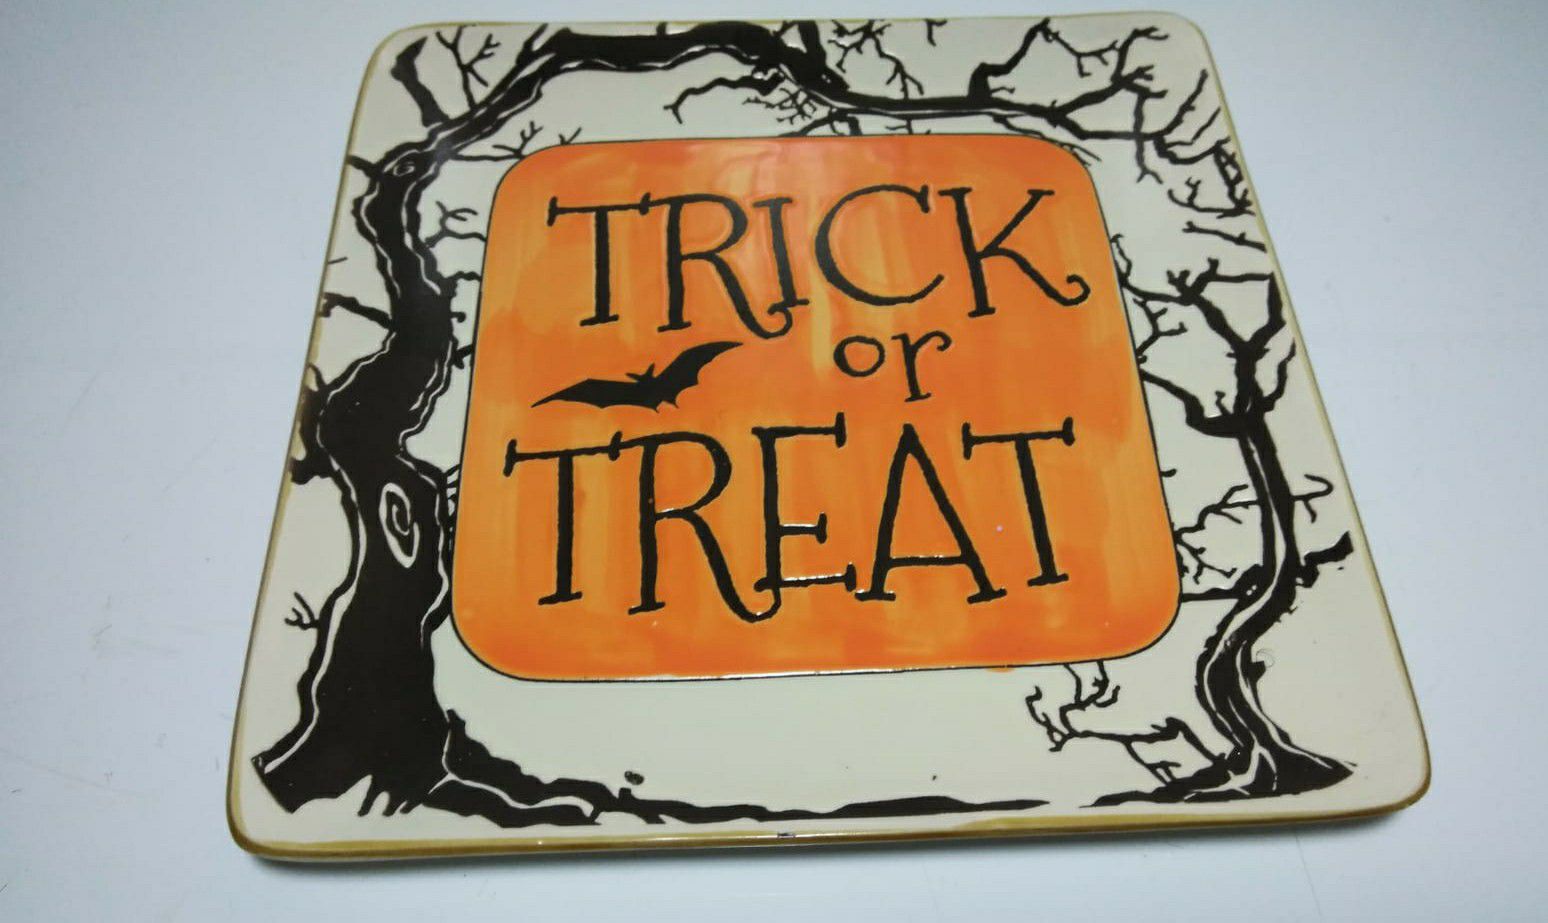 NEW (1) InHomeStylez Halloween Etched TRICK OR TREAT Square Plates Home Decor